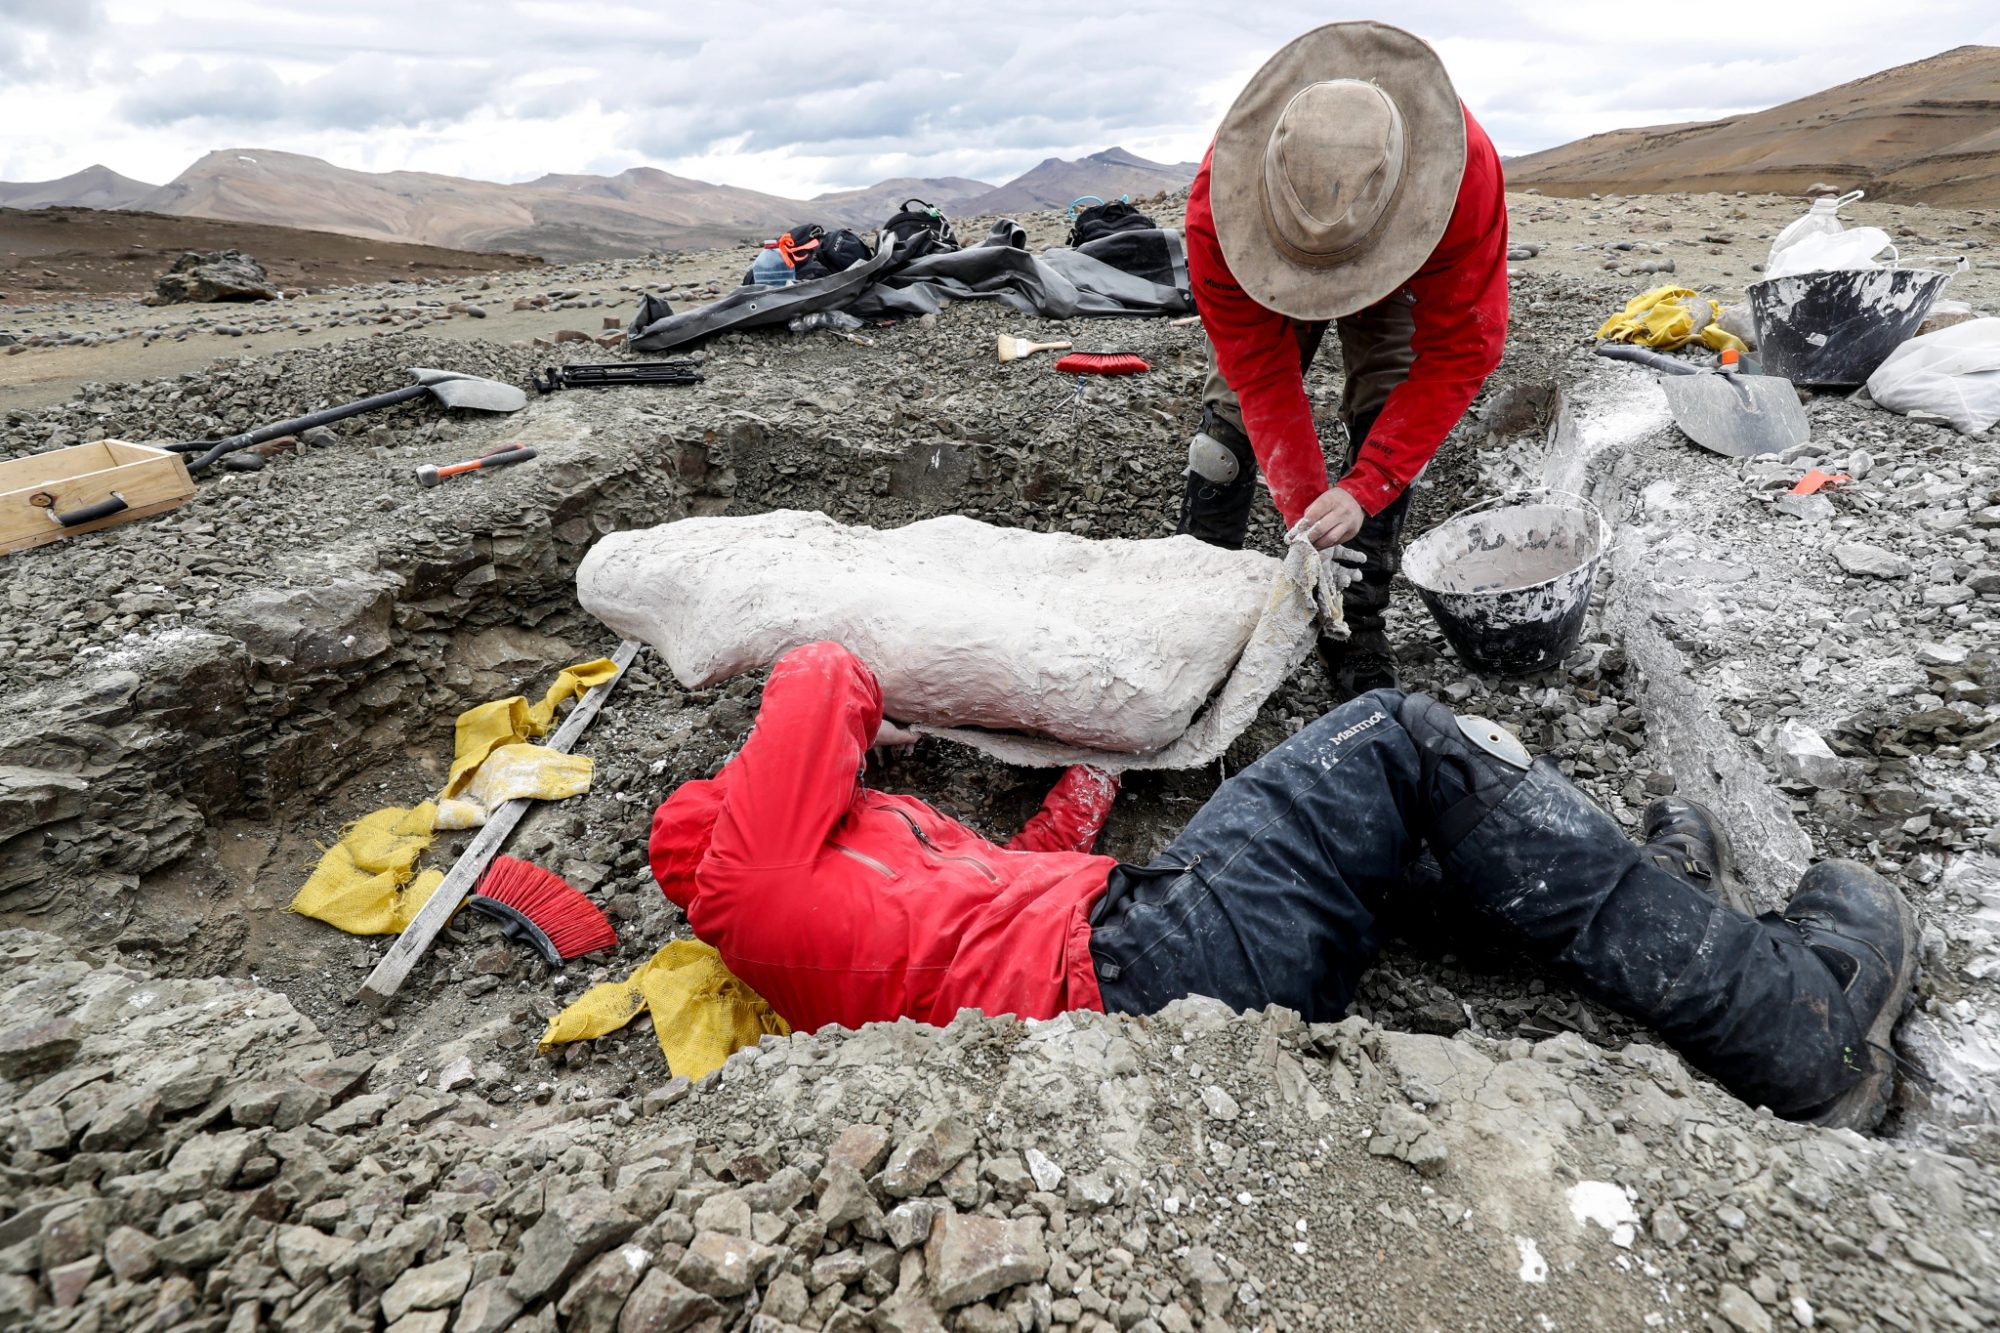 Argentinian paleontologists Agustin Martinelli (R) and Jonatan Kaluza work on a plaster jacket around a vertebrate dinosaur of the sauropsida family part of a fossil outcrop in the Valley of Las Chinas, in the Chilean Patagonia, Chile, 24 February 2020. EPA-EFE/FELIPE TRUEBA